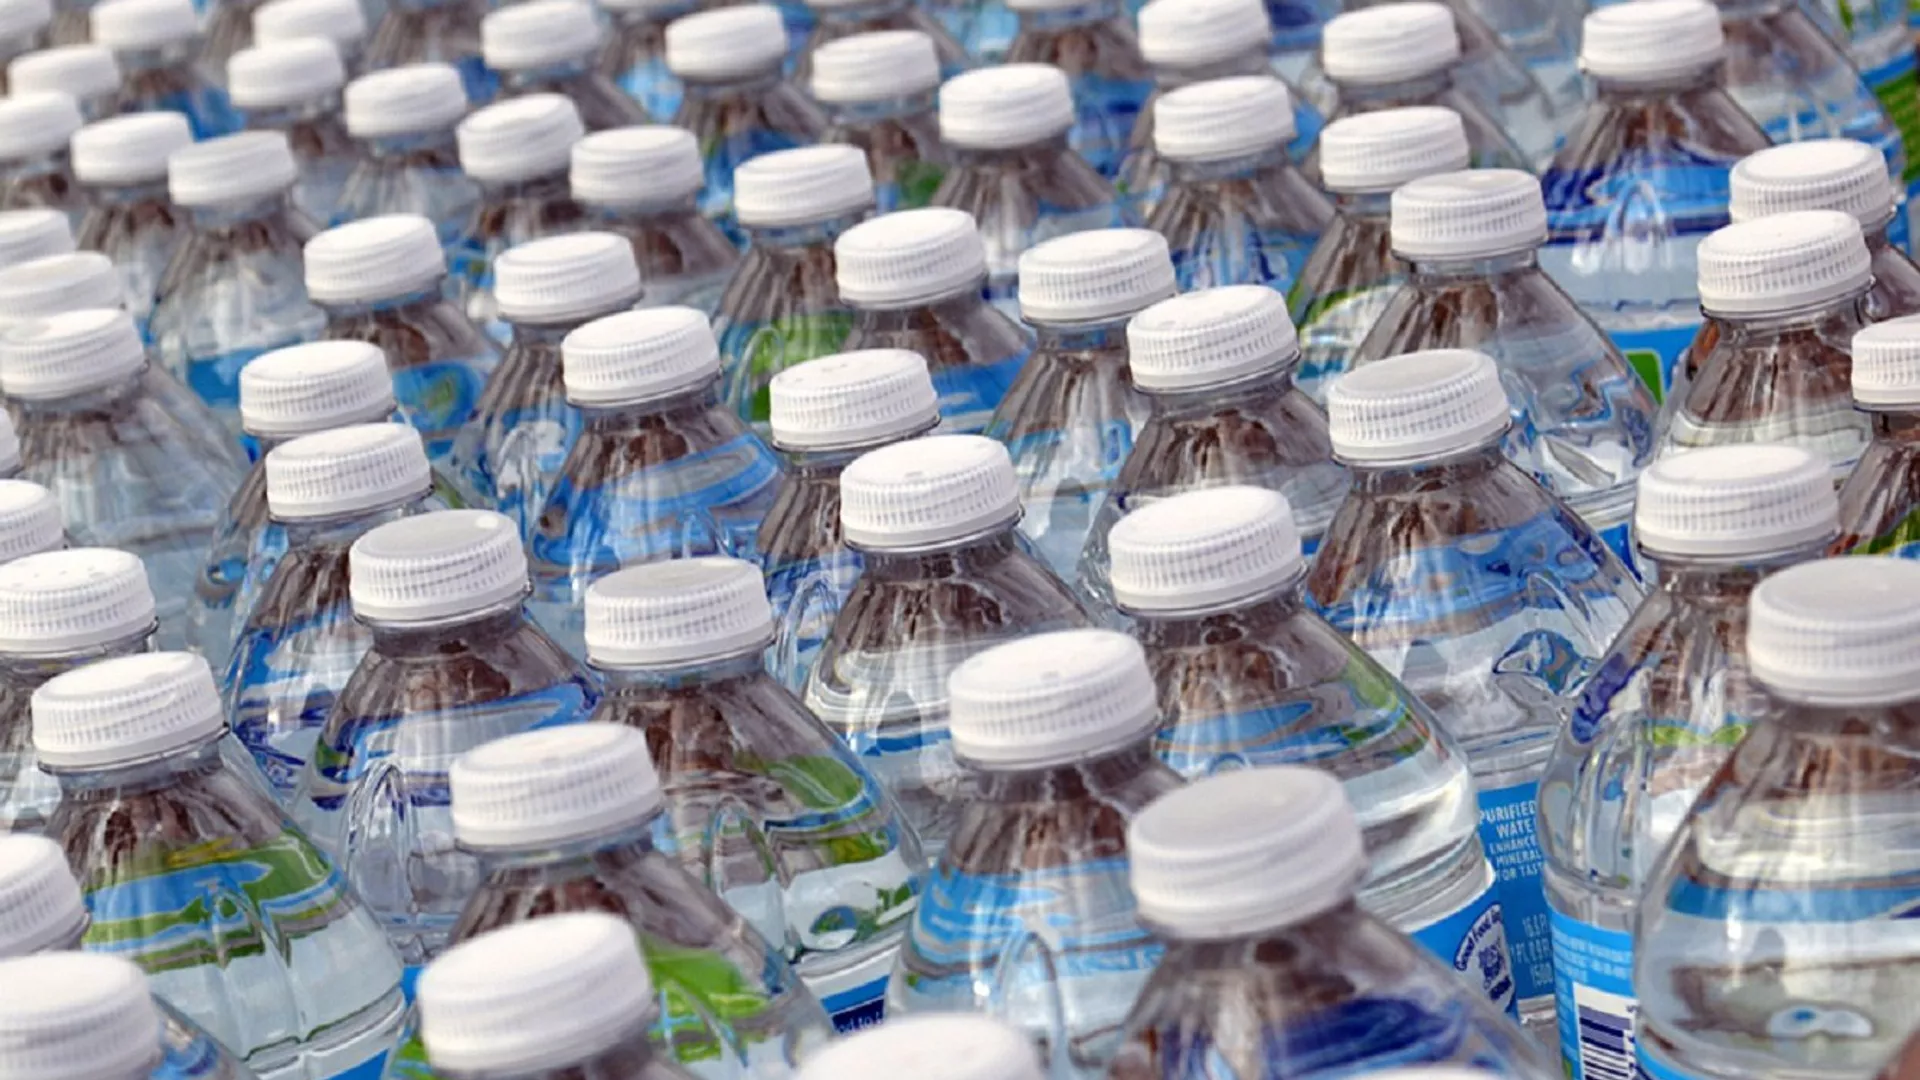 Huge Nanoplastic Particle Count Found in Top US Bottled Water Brands